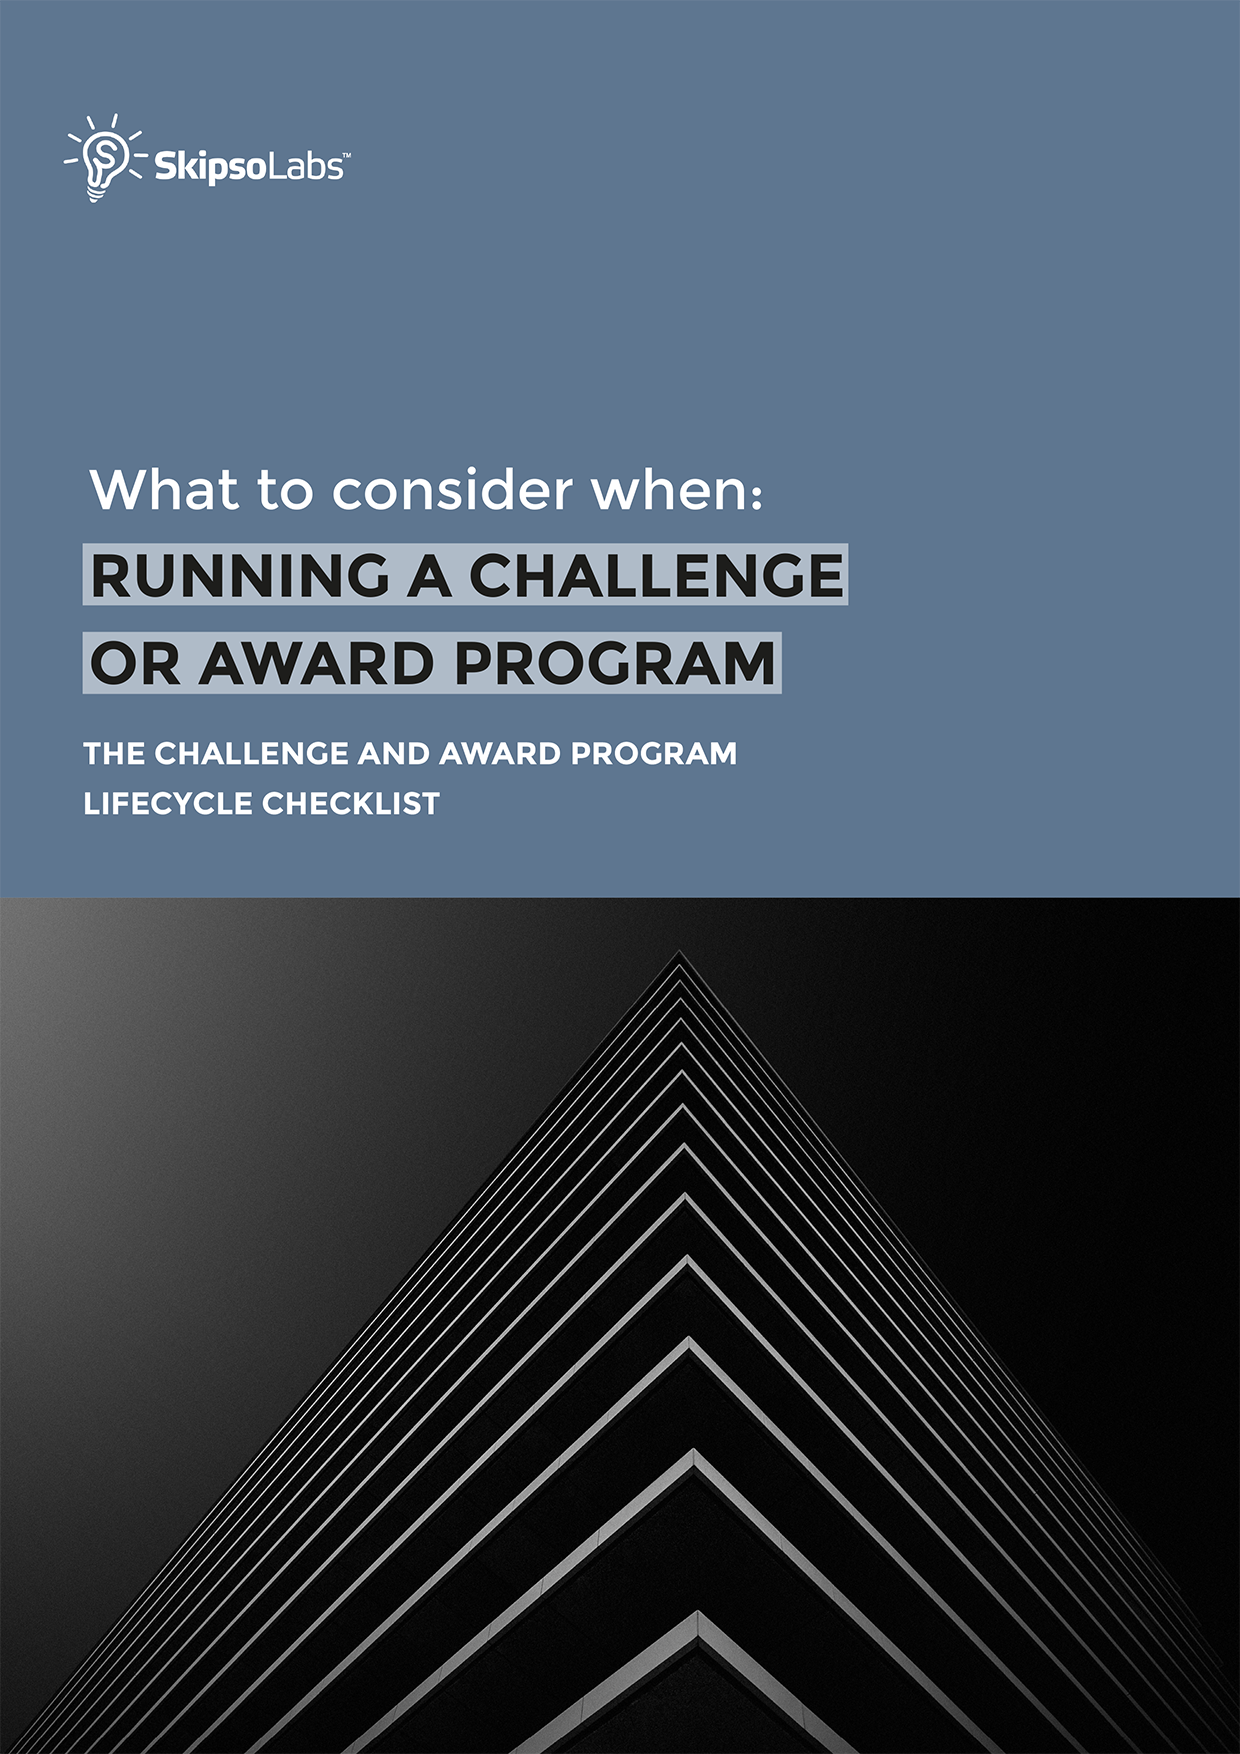 Whitepaper_What to consider when running a challenge or award program-1-1